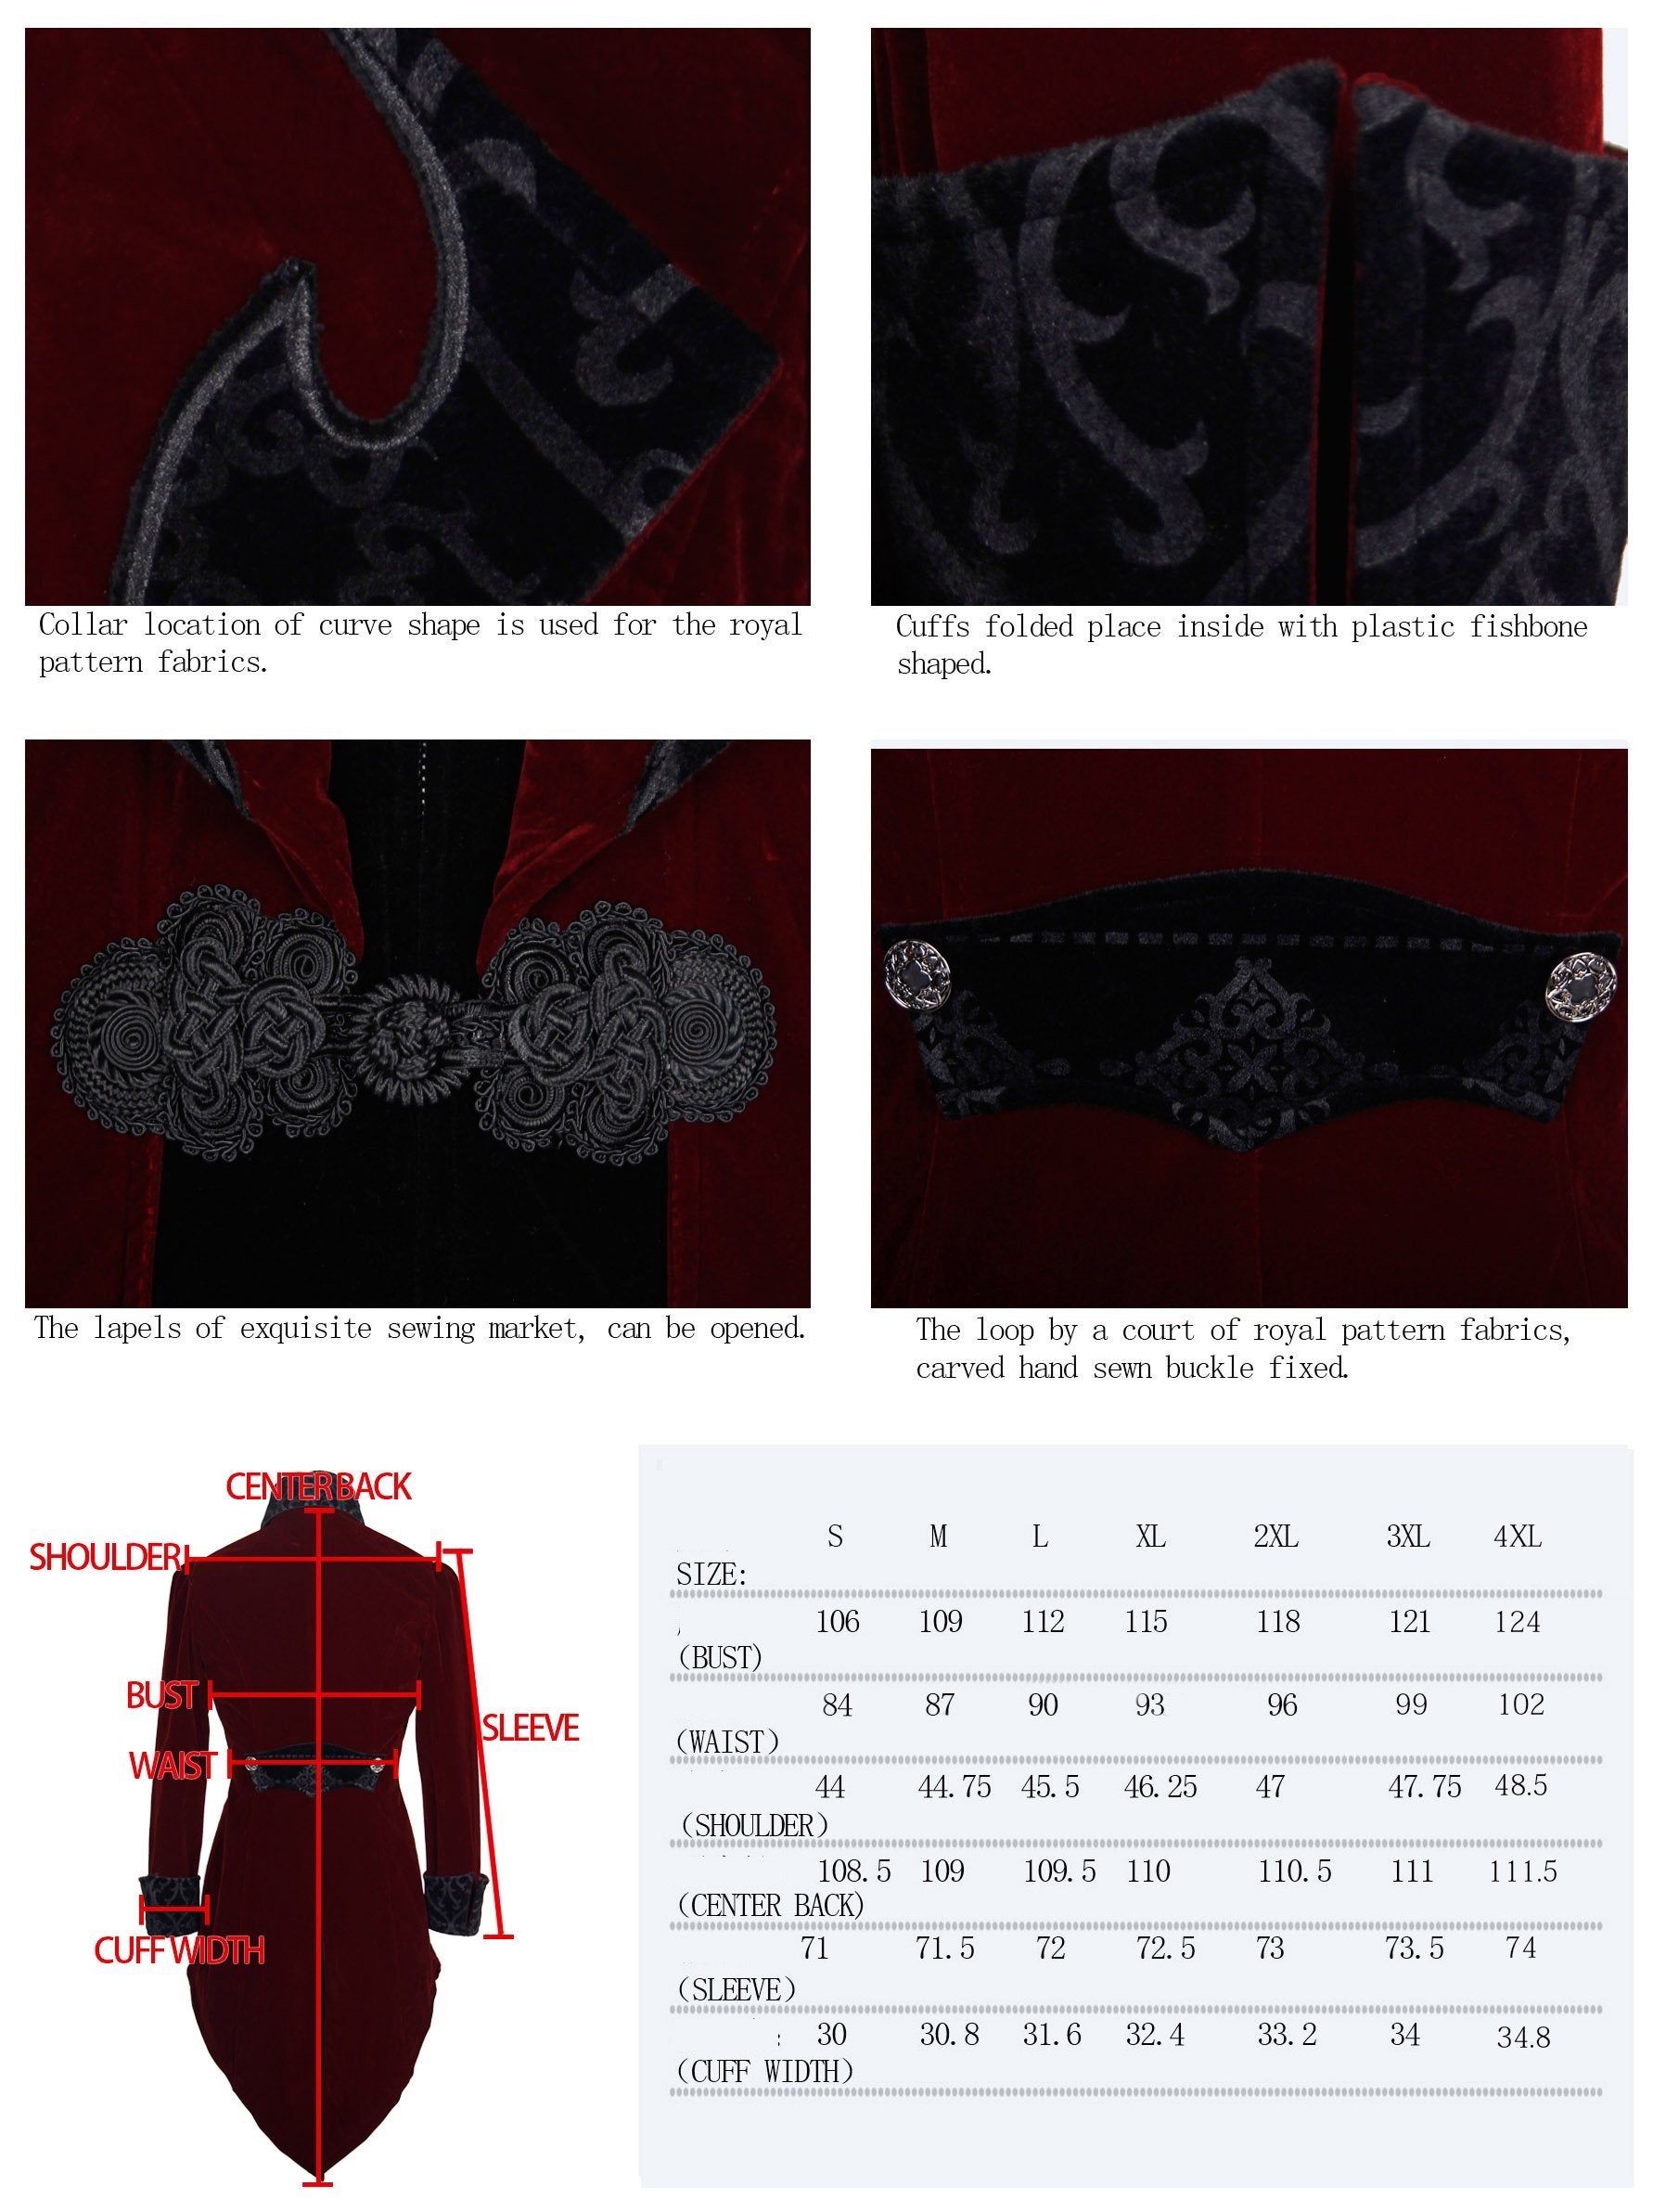 Victorian Dandy' Formal Swallow-tail Goth Coat